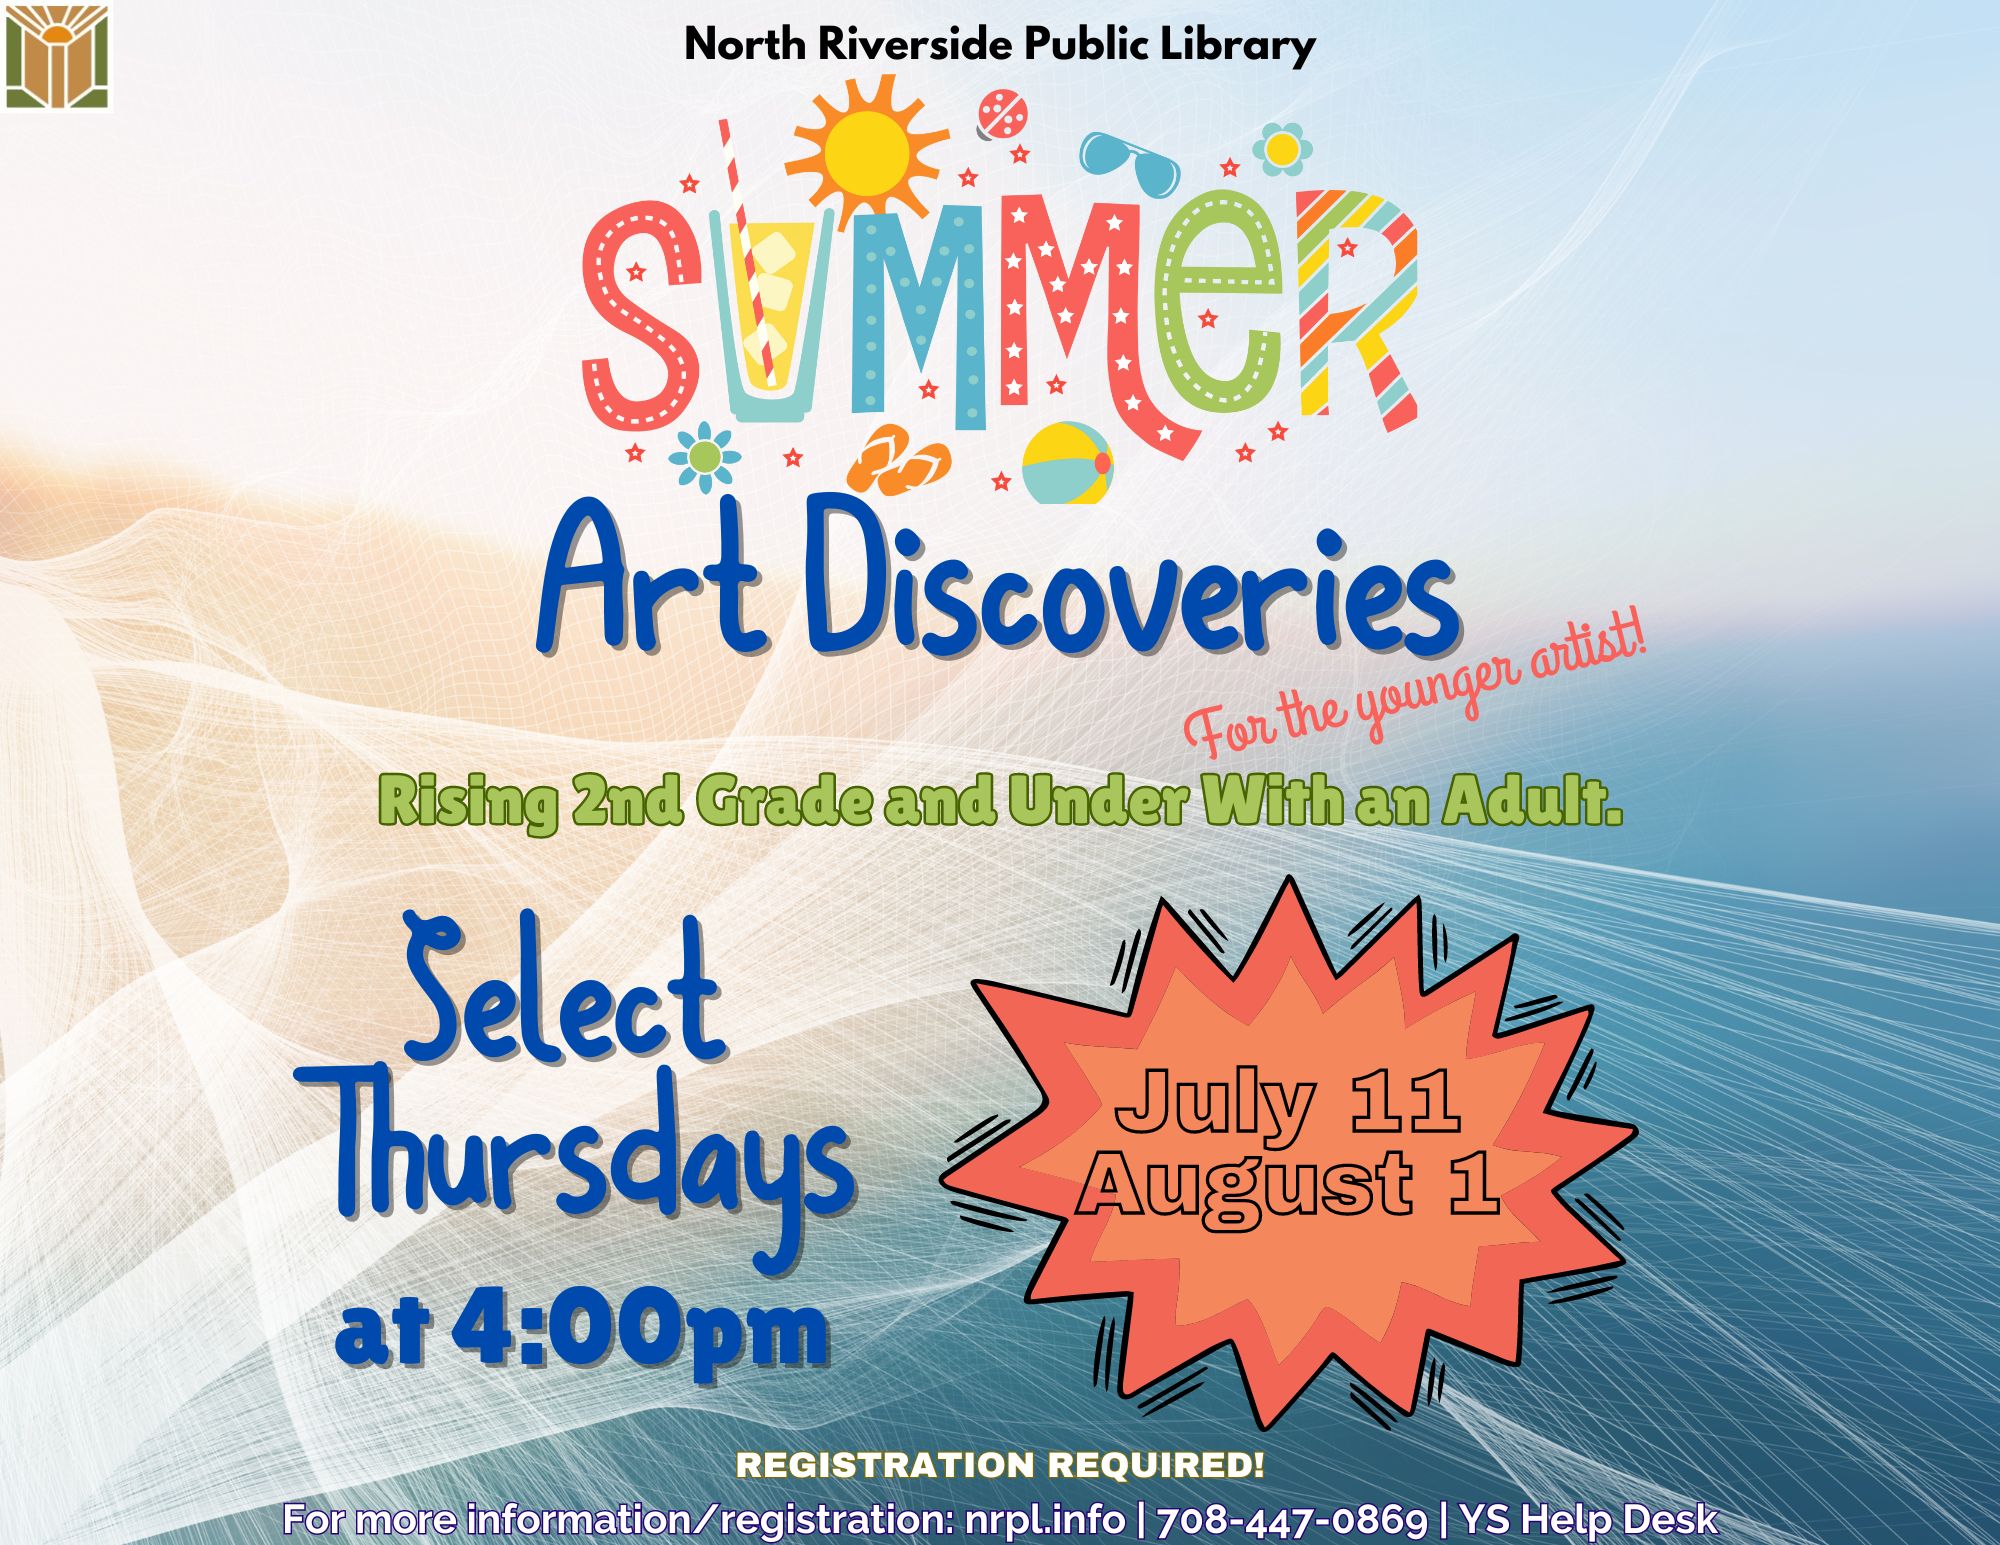 Summer Art Discoveries. For the younger artist, starting grade 2 and under. With an adult. Select Thursdays at 4:00pm. July 11- Painting/coloring/decorating below the ocean surface. Registration required.